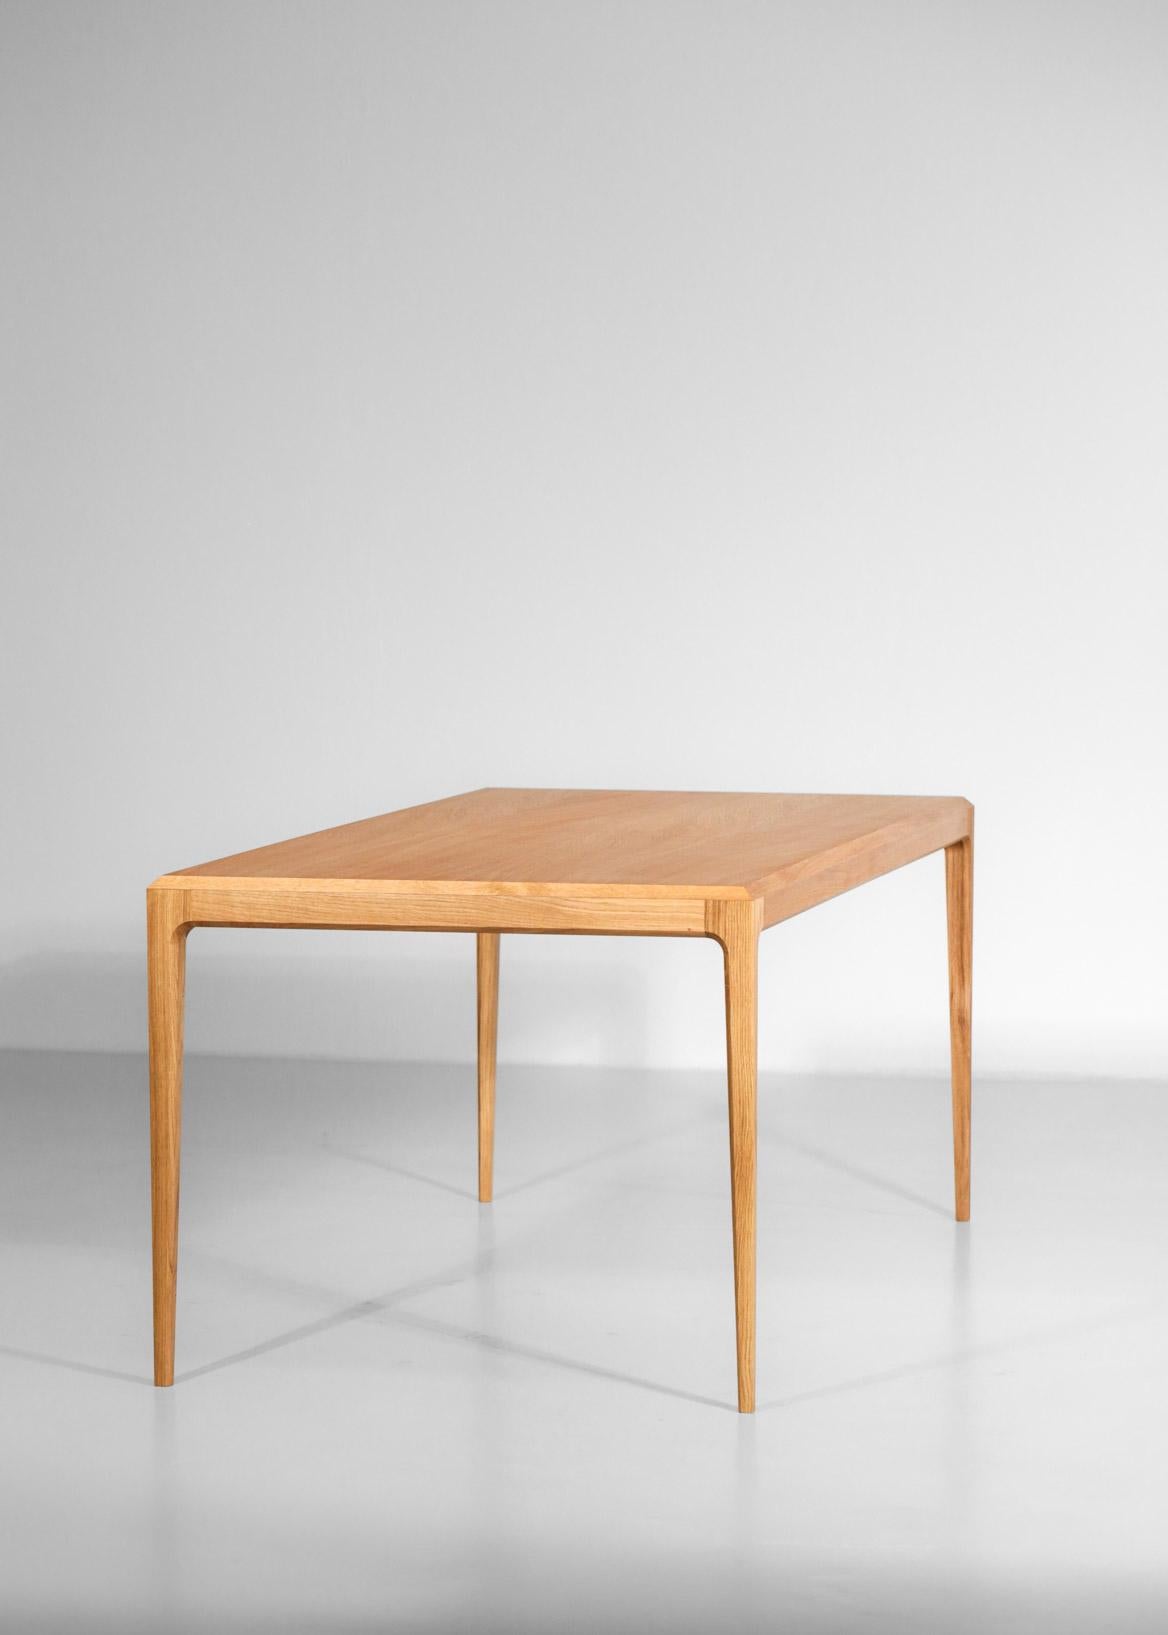 Modern dining table or desk inspired by Danish design. Handcrafted manufacturing in France. The table is made with oak.